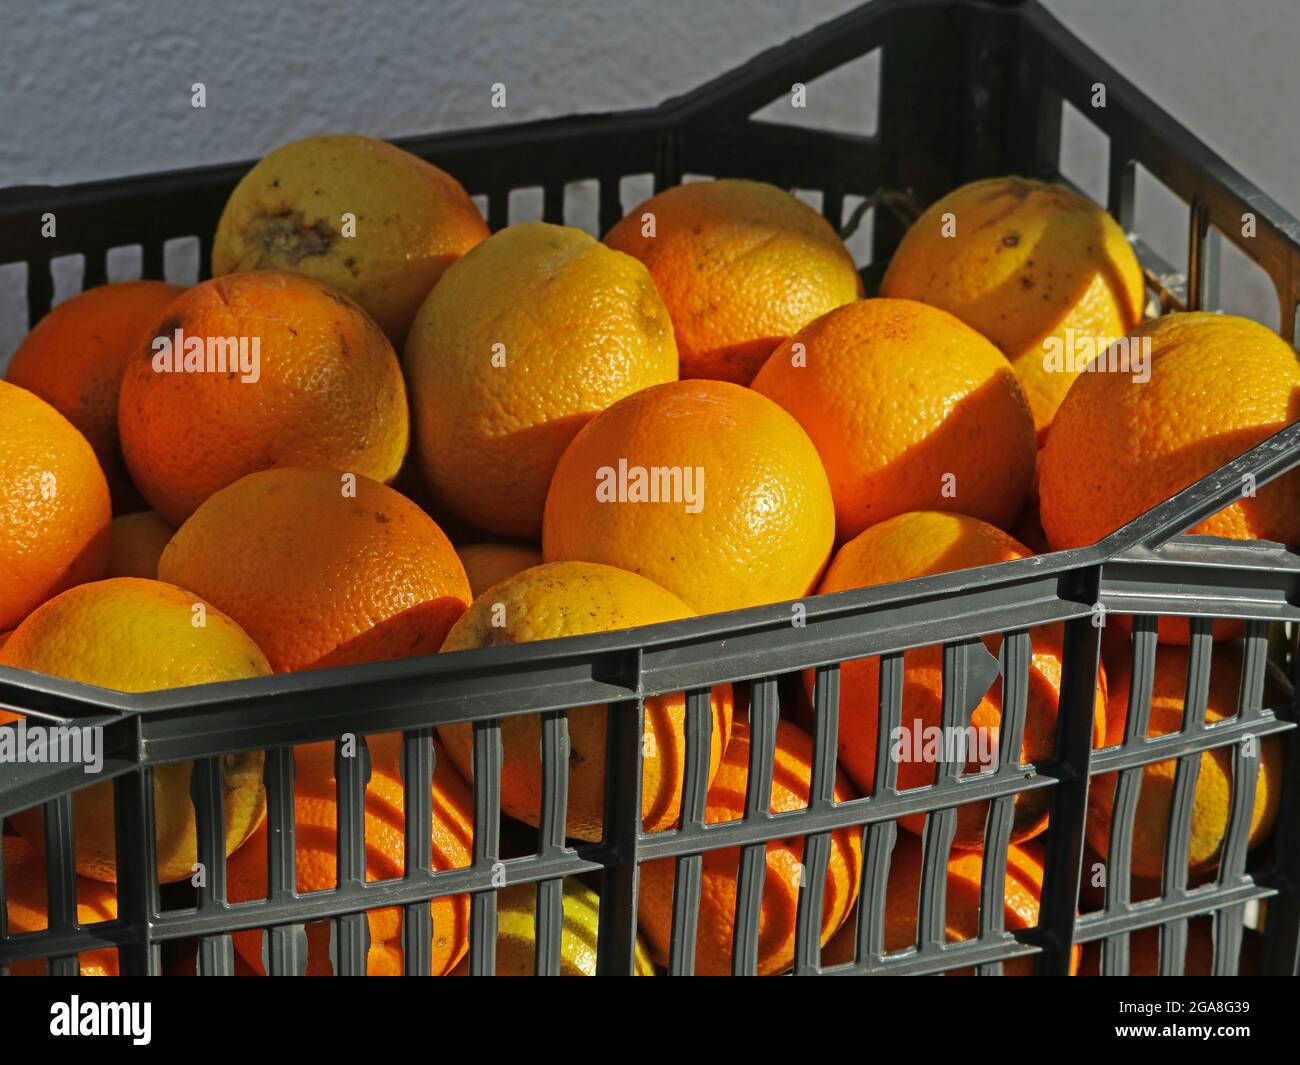 fresh ripe oranges in platic basket for sale in natural sunlight, close up Stock Photo